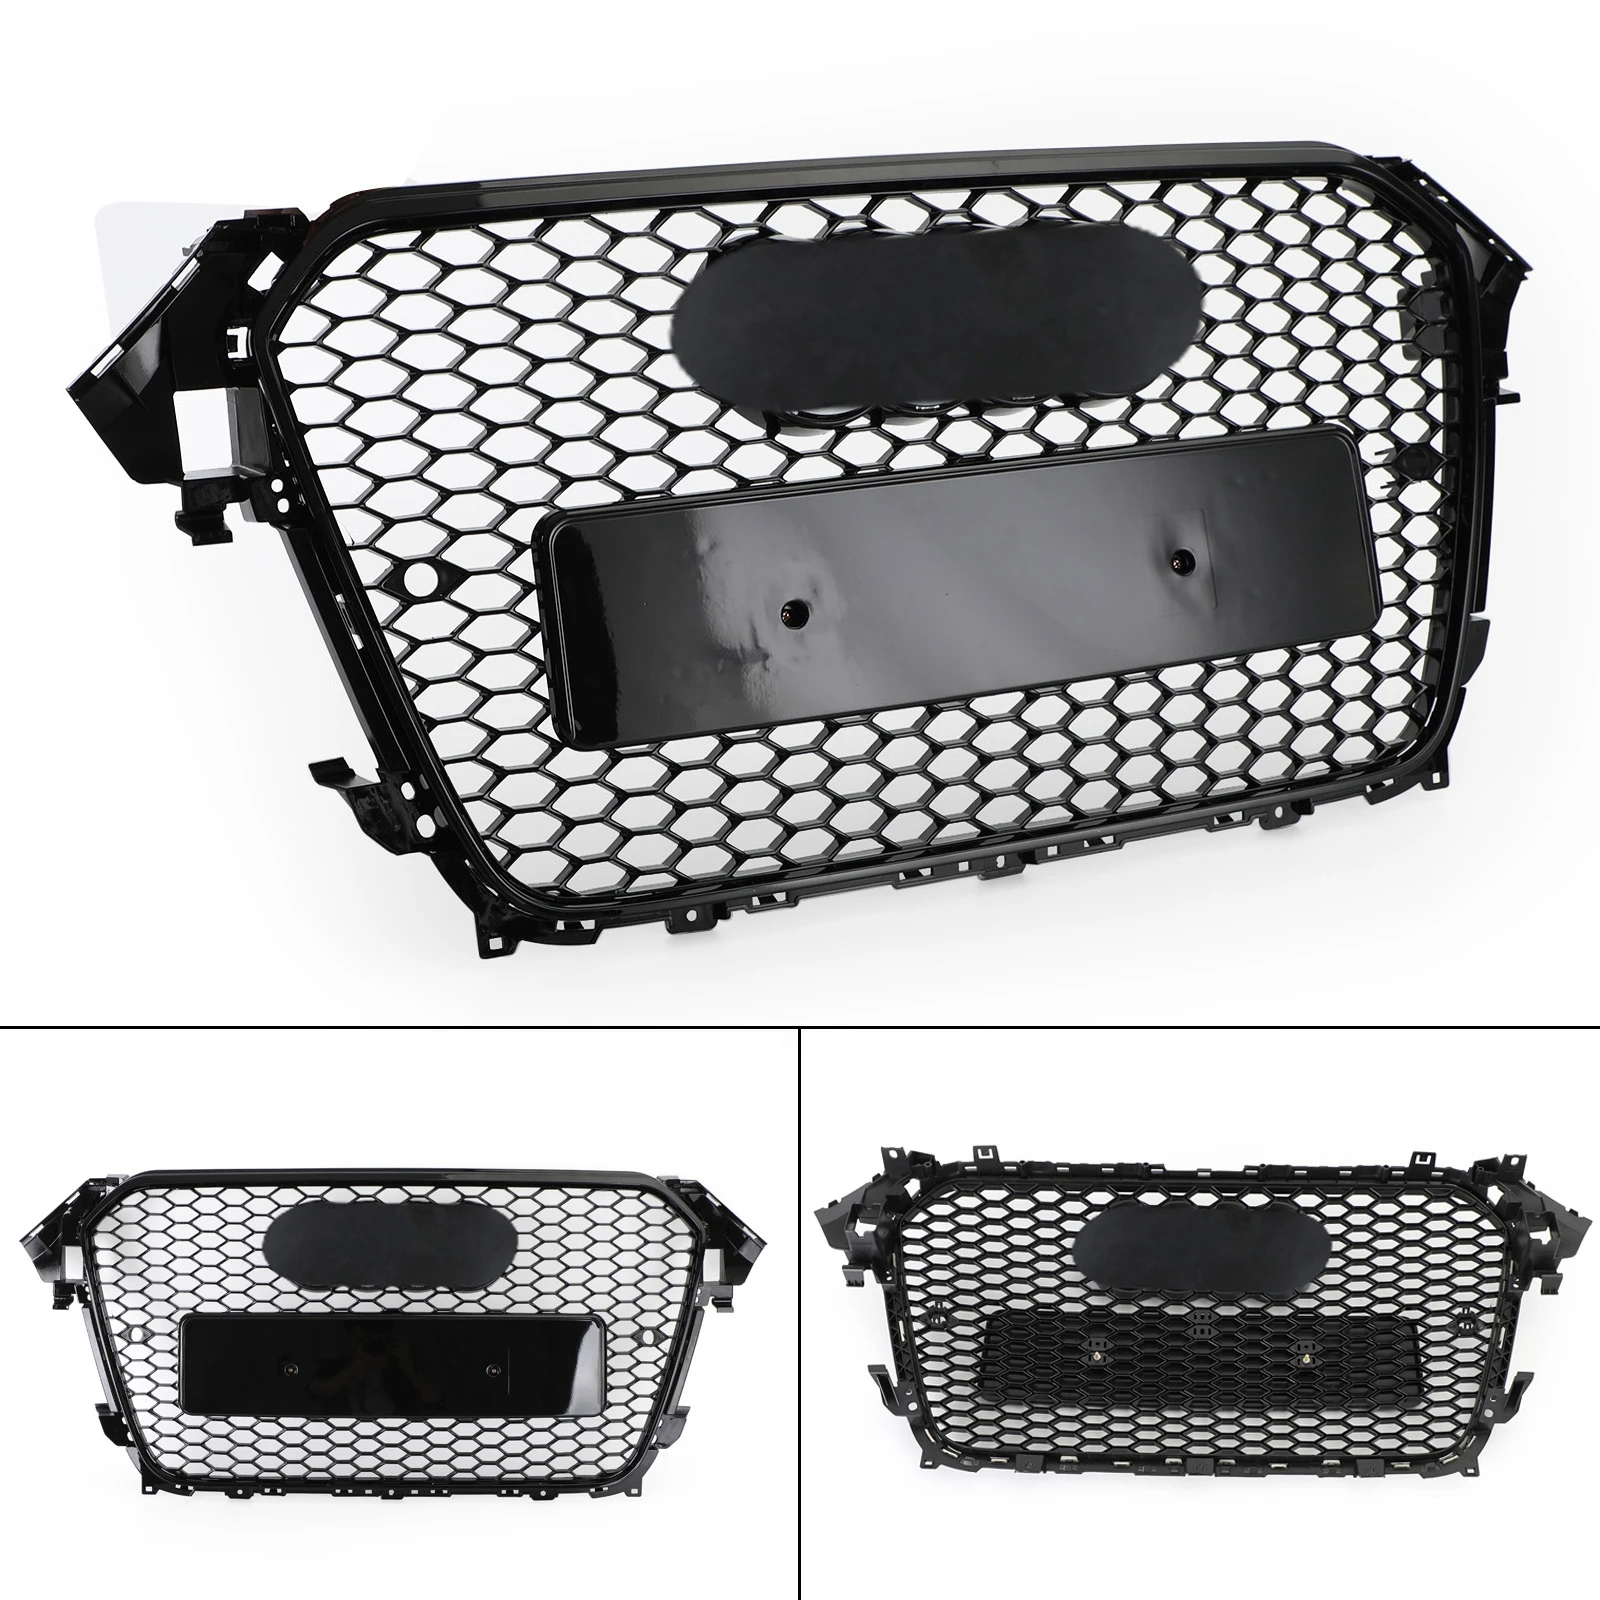 

Gloss Black RS4 Style Mesh Front Bumper Grille Grill For Audi A4 S4 B8.5 2013 2014 2015 2016